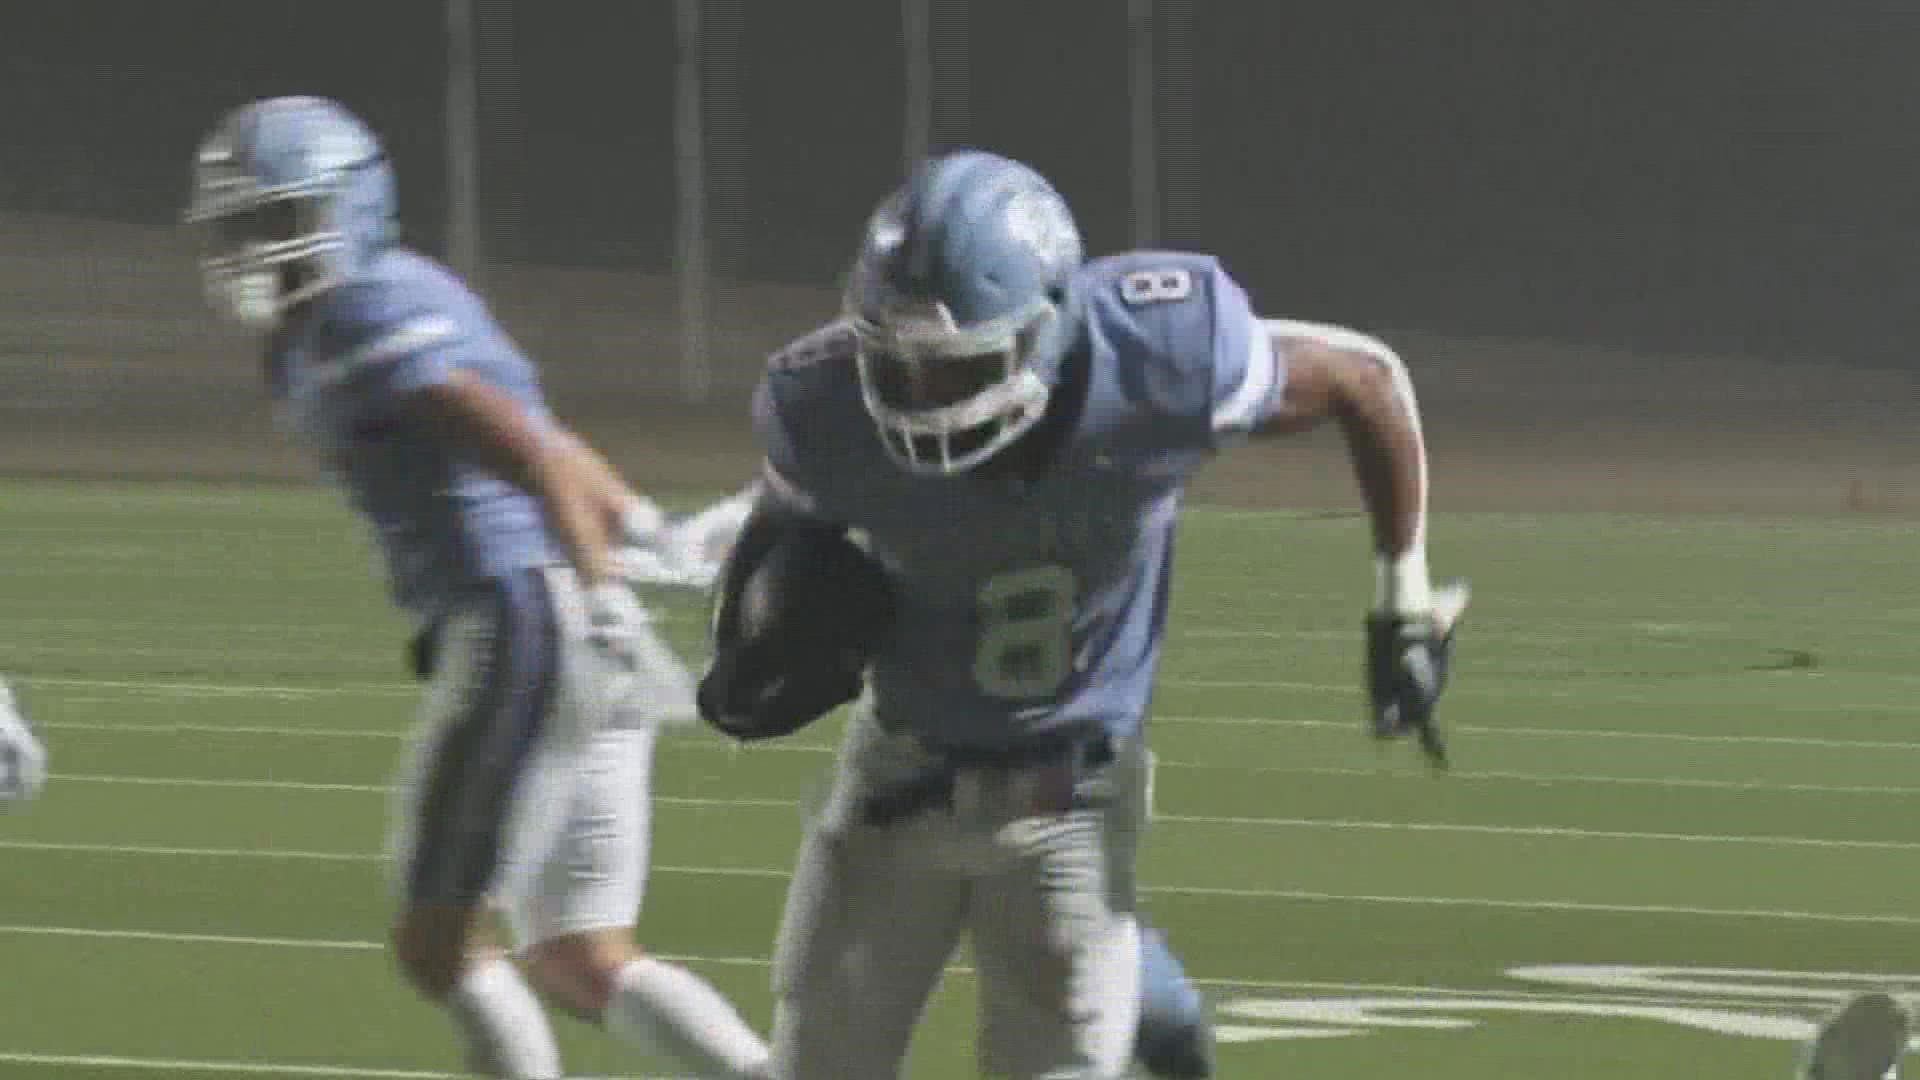 China Spring will face 15-0 Boerne for the 4A Div. I state championship, looking to win its second consecutive crown.